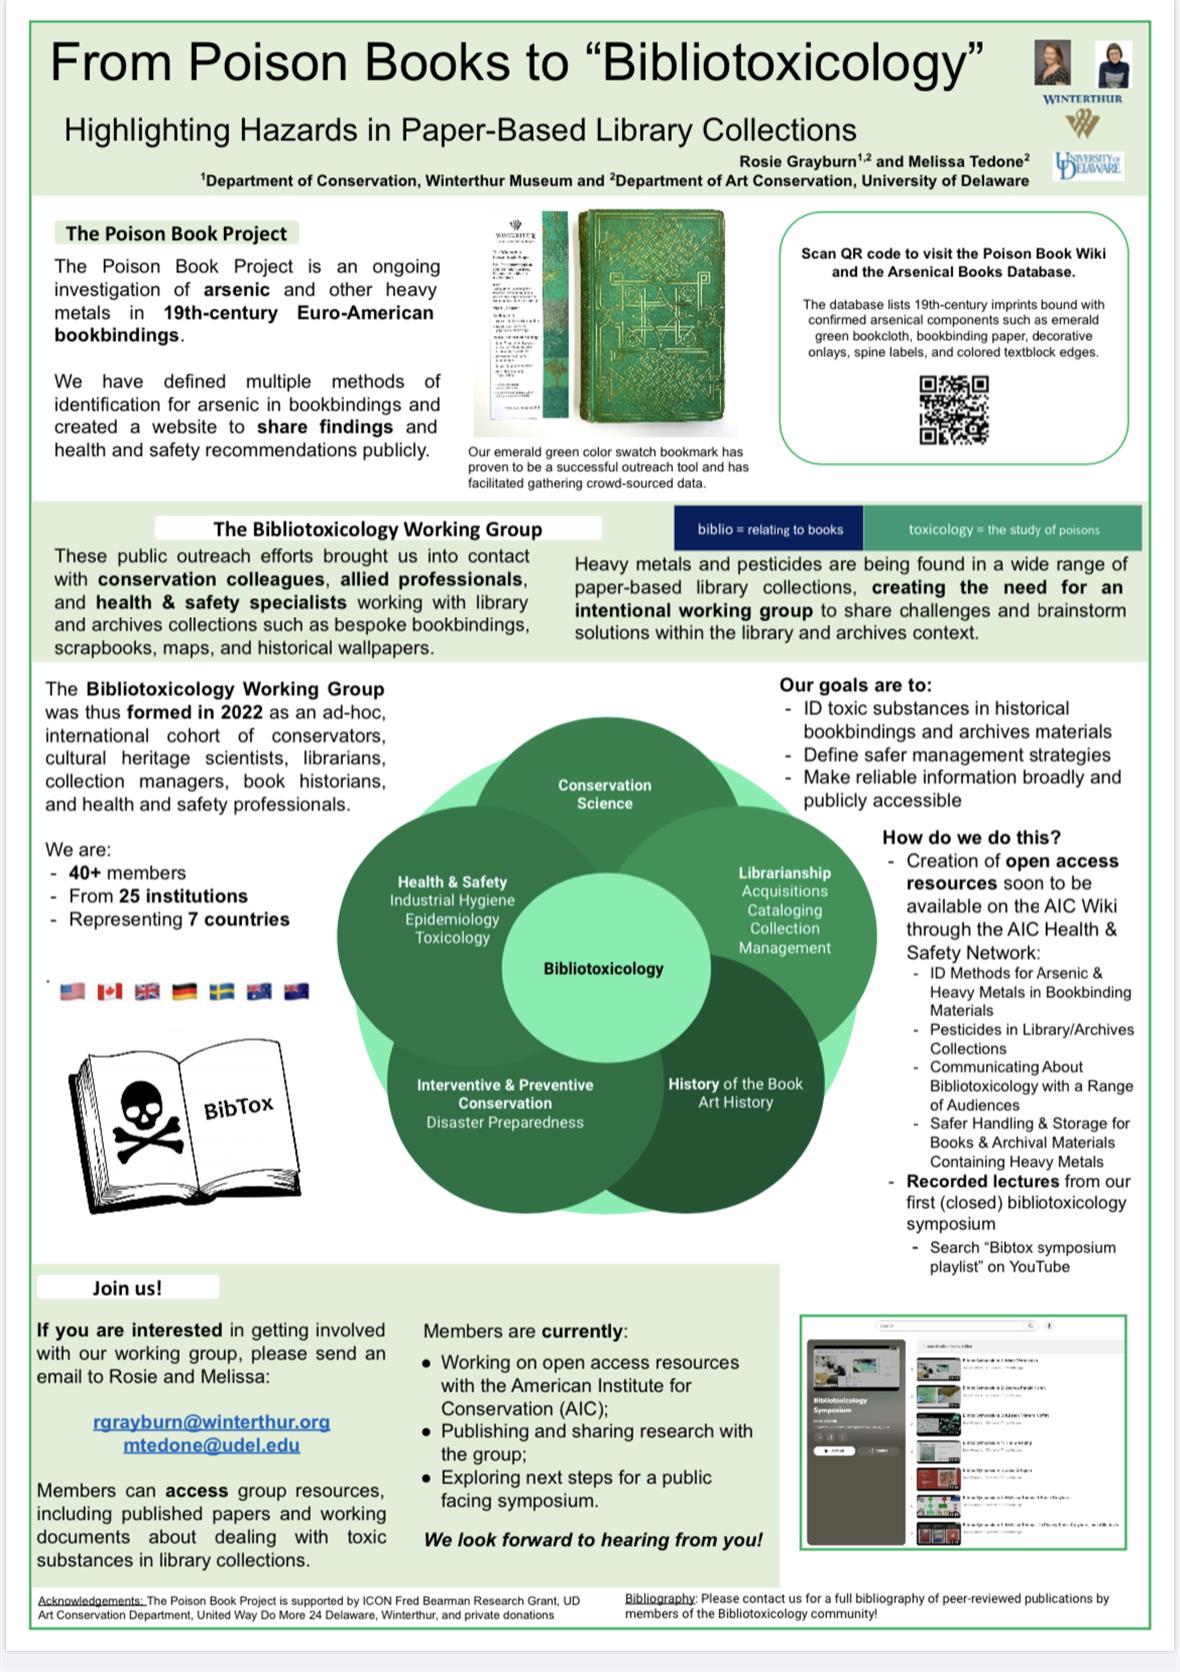 Copy of poster presented at conferences, including venn diagram of the overlap between the research project and working group.